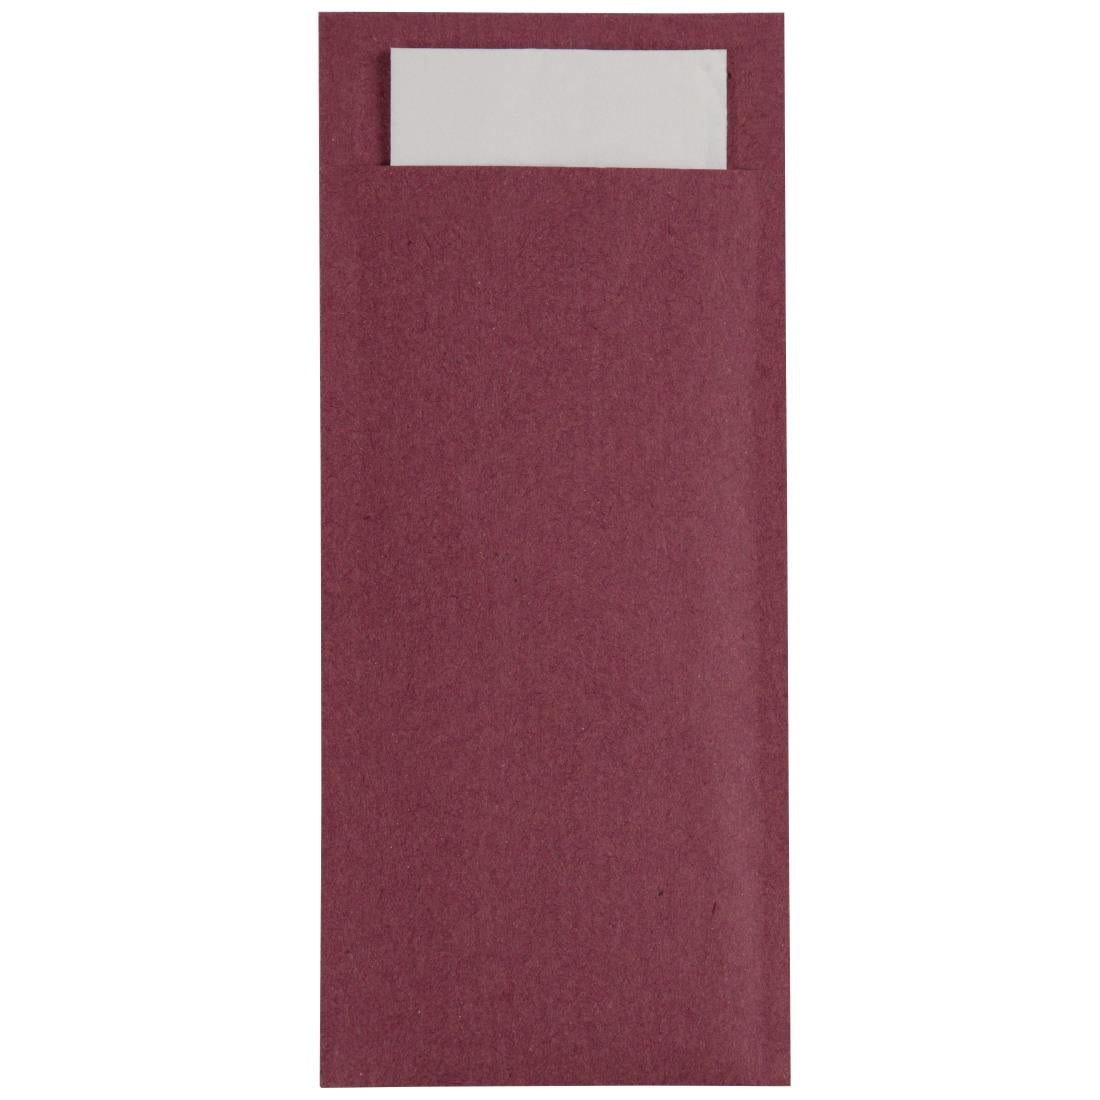 CK234 Europochette Burgundy Cutlery Pouch with White Napkin (Pack of 500) JD Catering Equipment Solutions Ltd